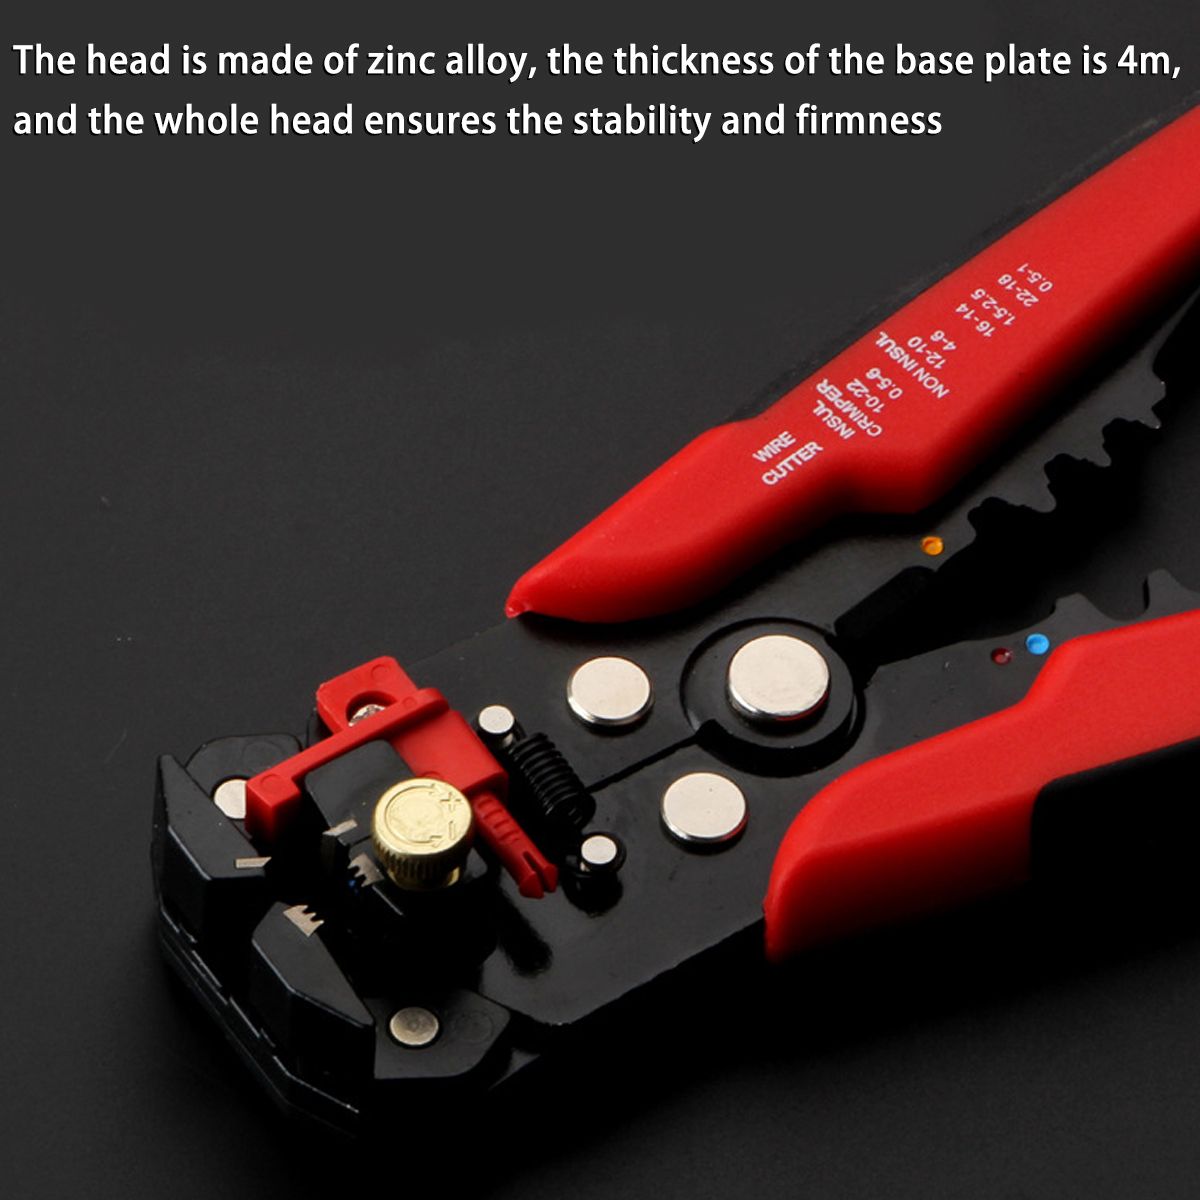 Stripper-Pliers-Wire-Automatic-Cable-Crimping-Plier-Multifunctional-Terminal-1688439